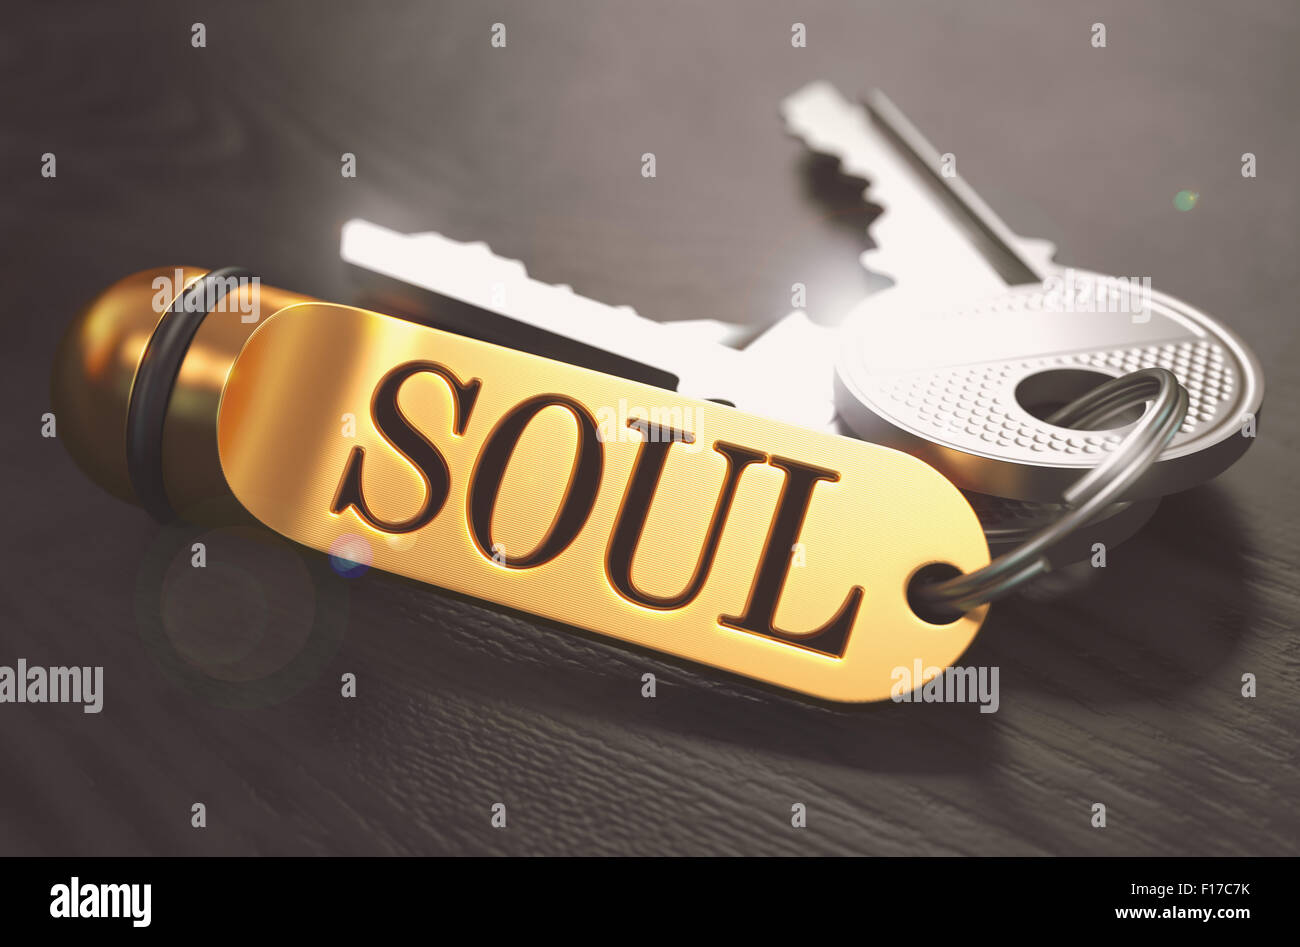 Keys and Golden Keyring with the Word Soul over Black Wooden Table with Blur Effect. Toned Image. Stock Photo